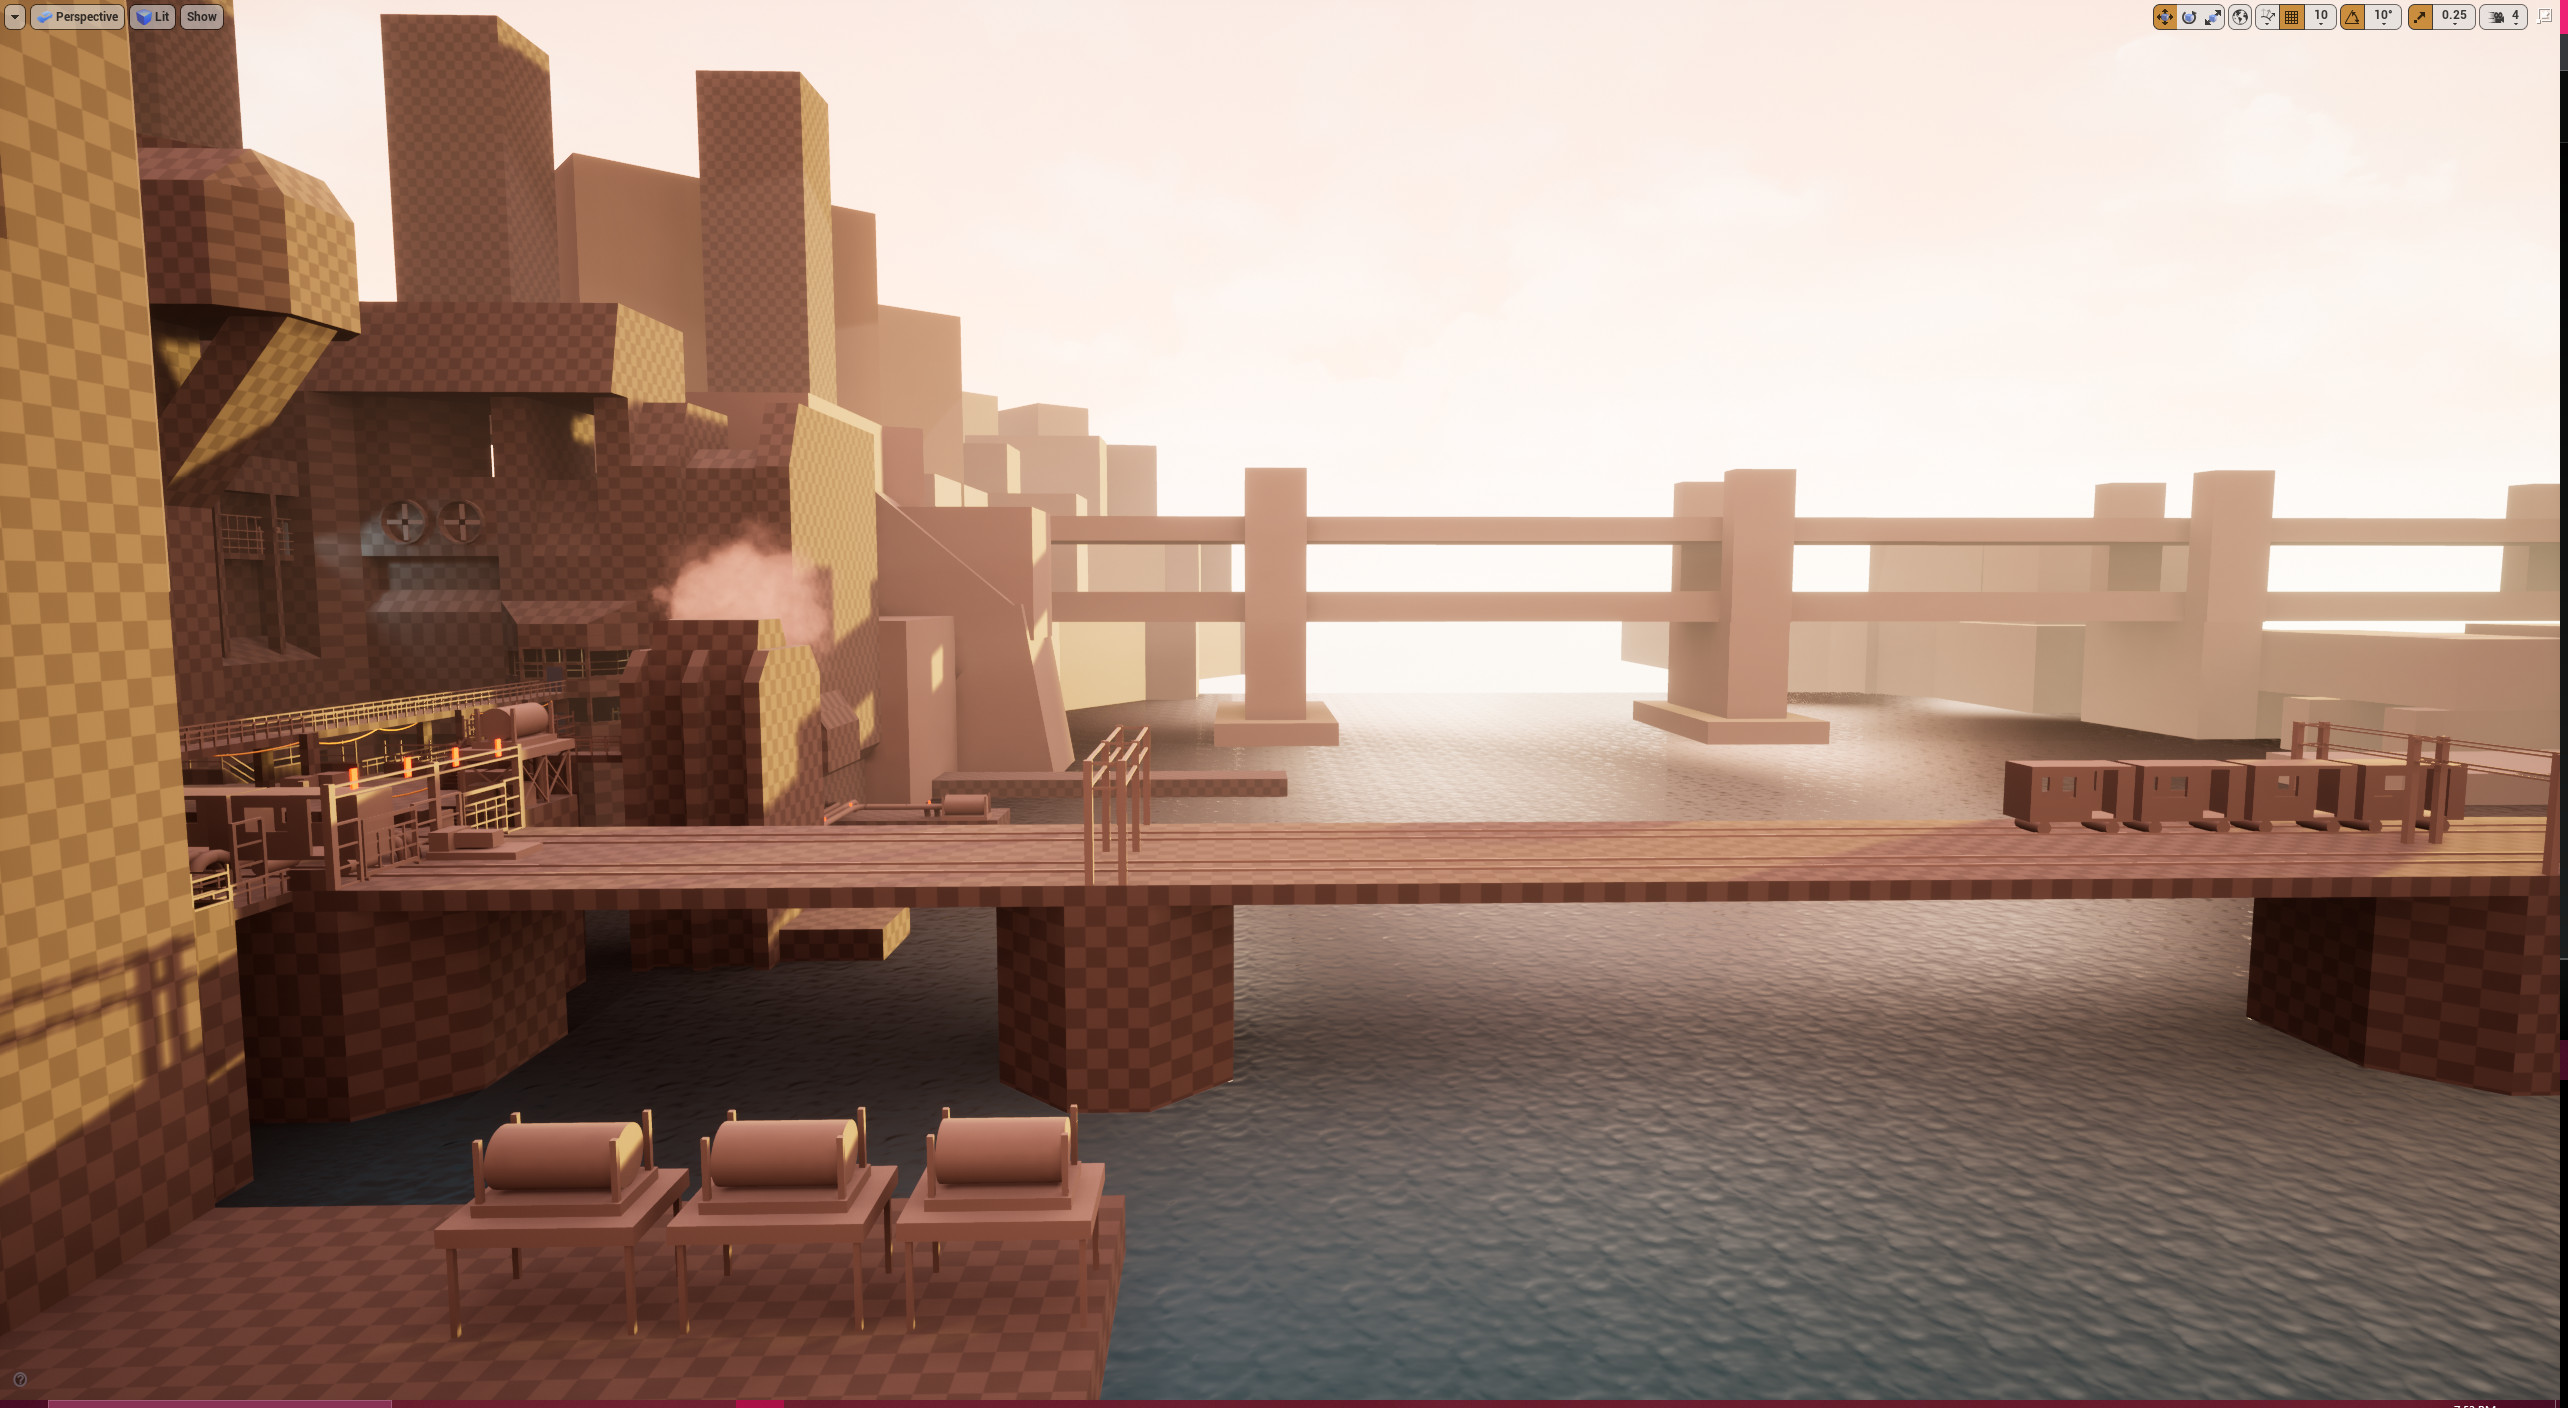 A side view of the bridge the player needs to cross.